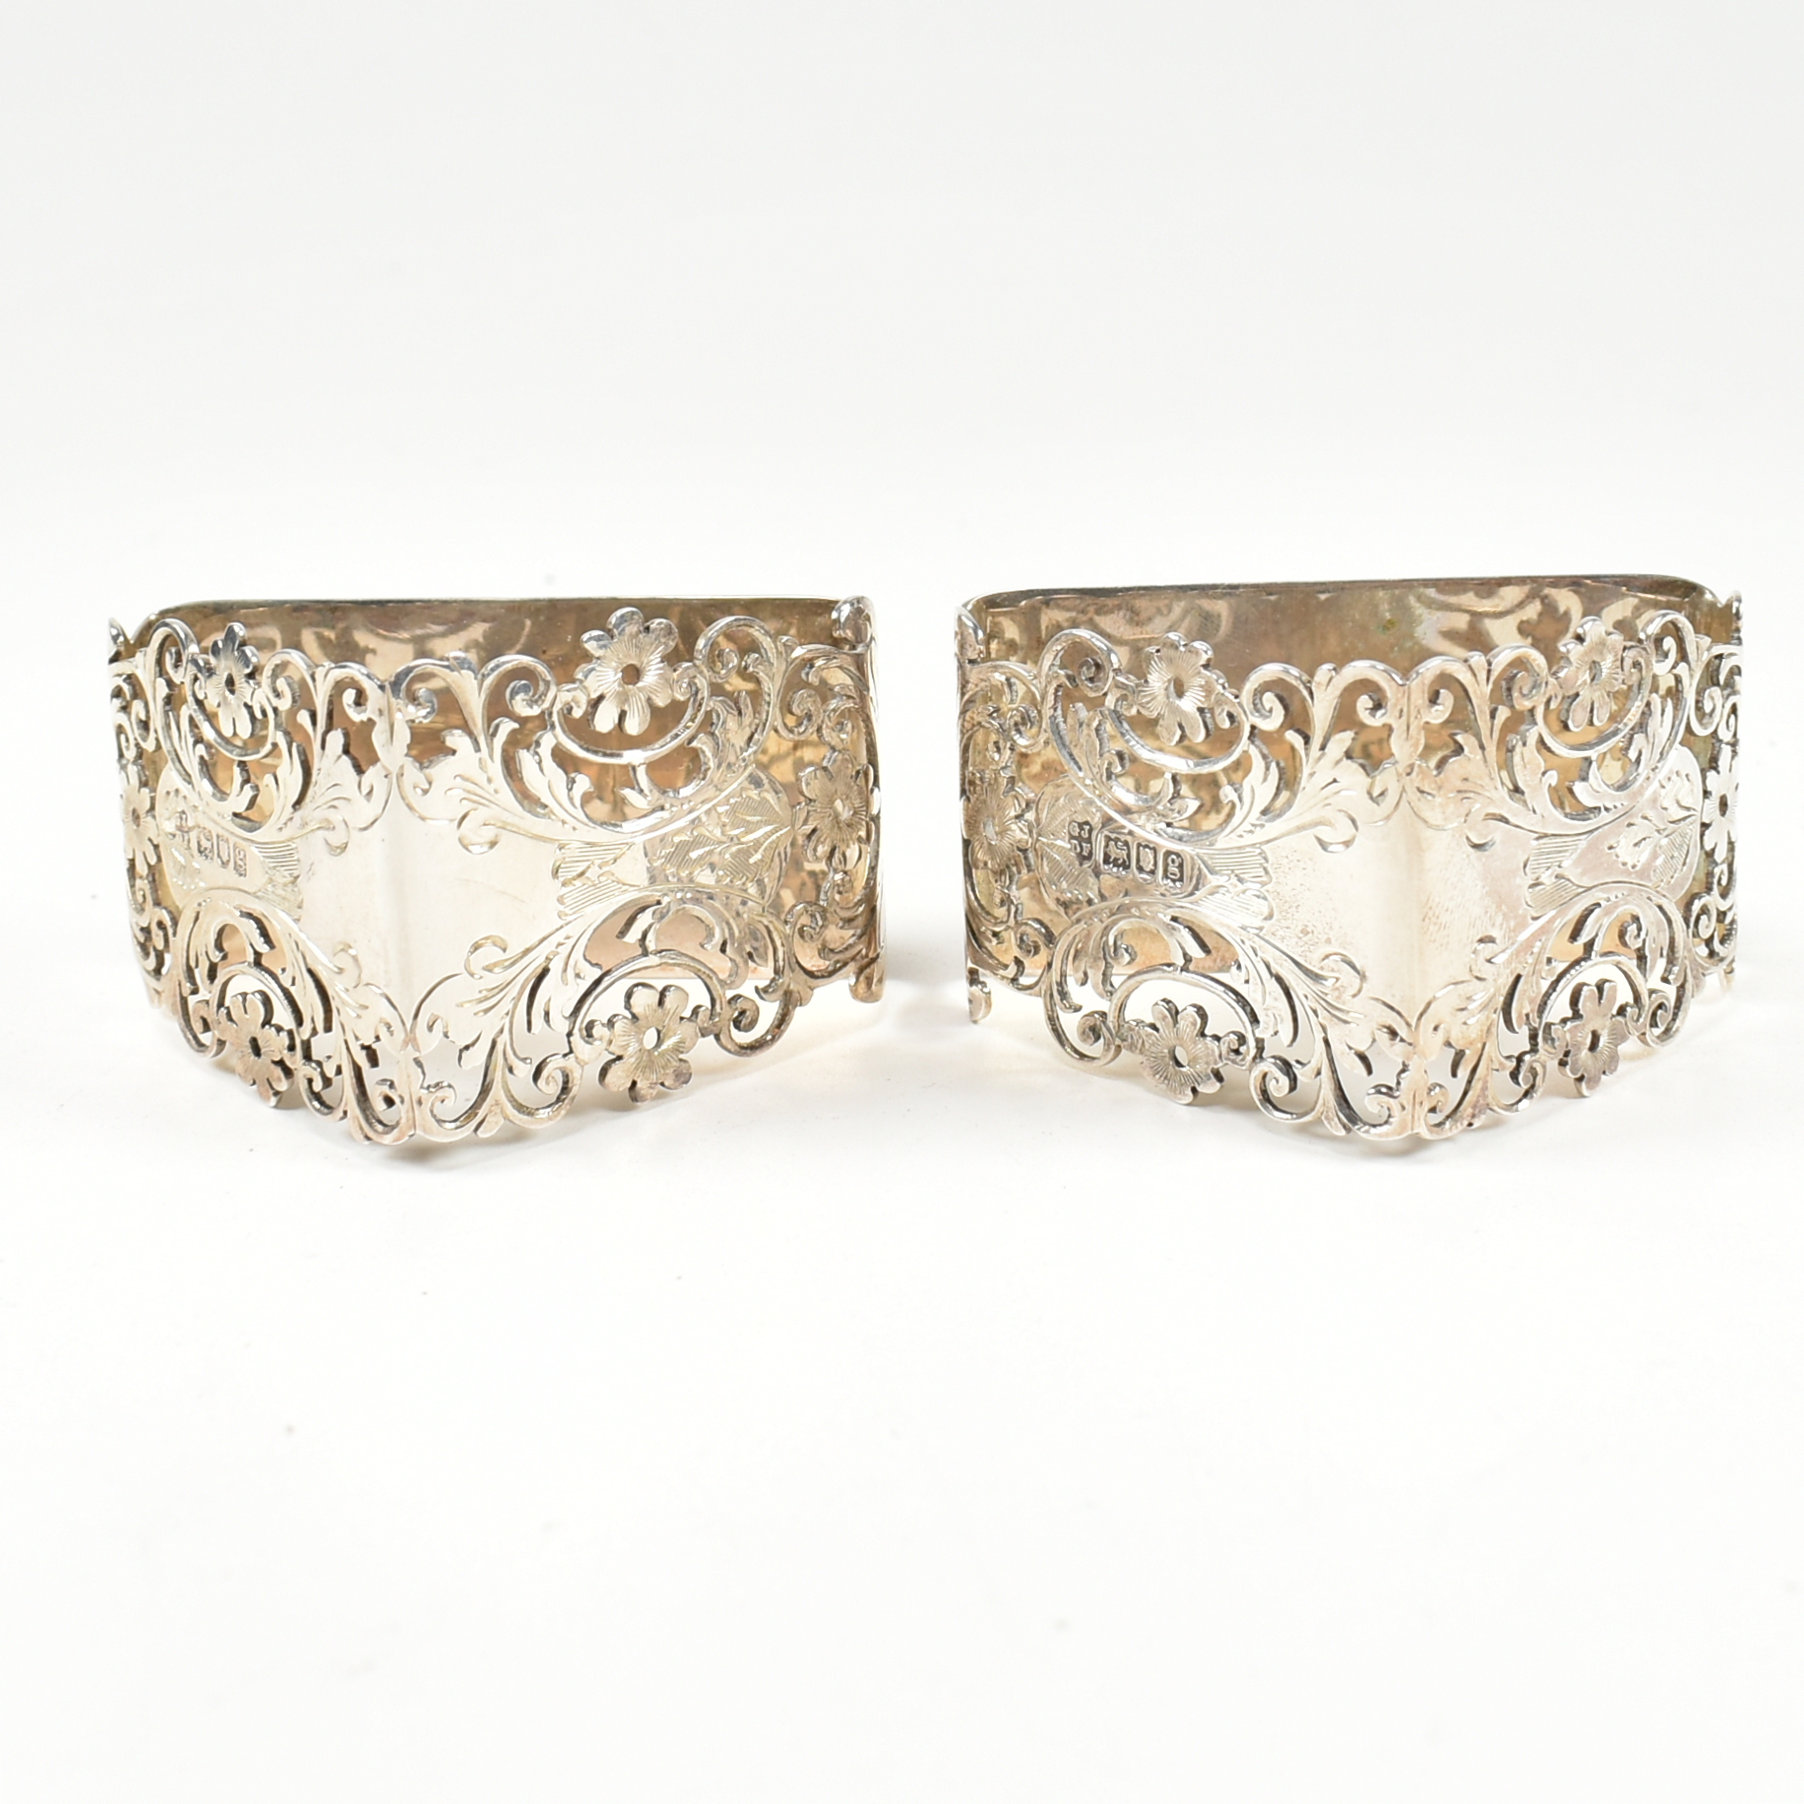 EDWARD VII CASED PAIR OF HALLMARKED SILVER NAPKIN RINGS - Image 2 of 9